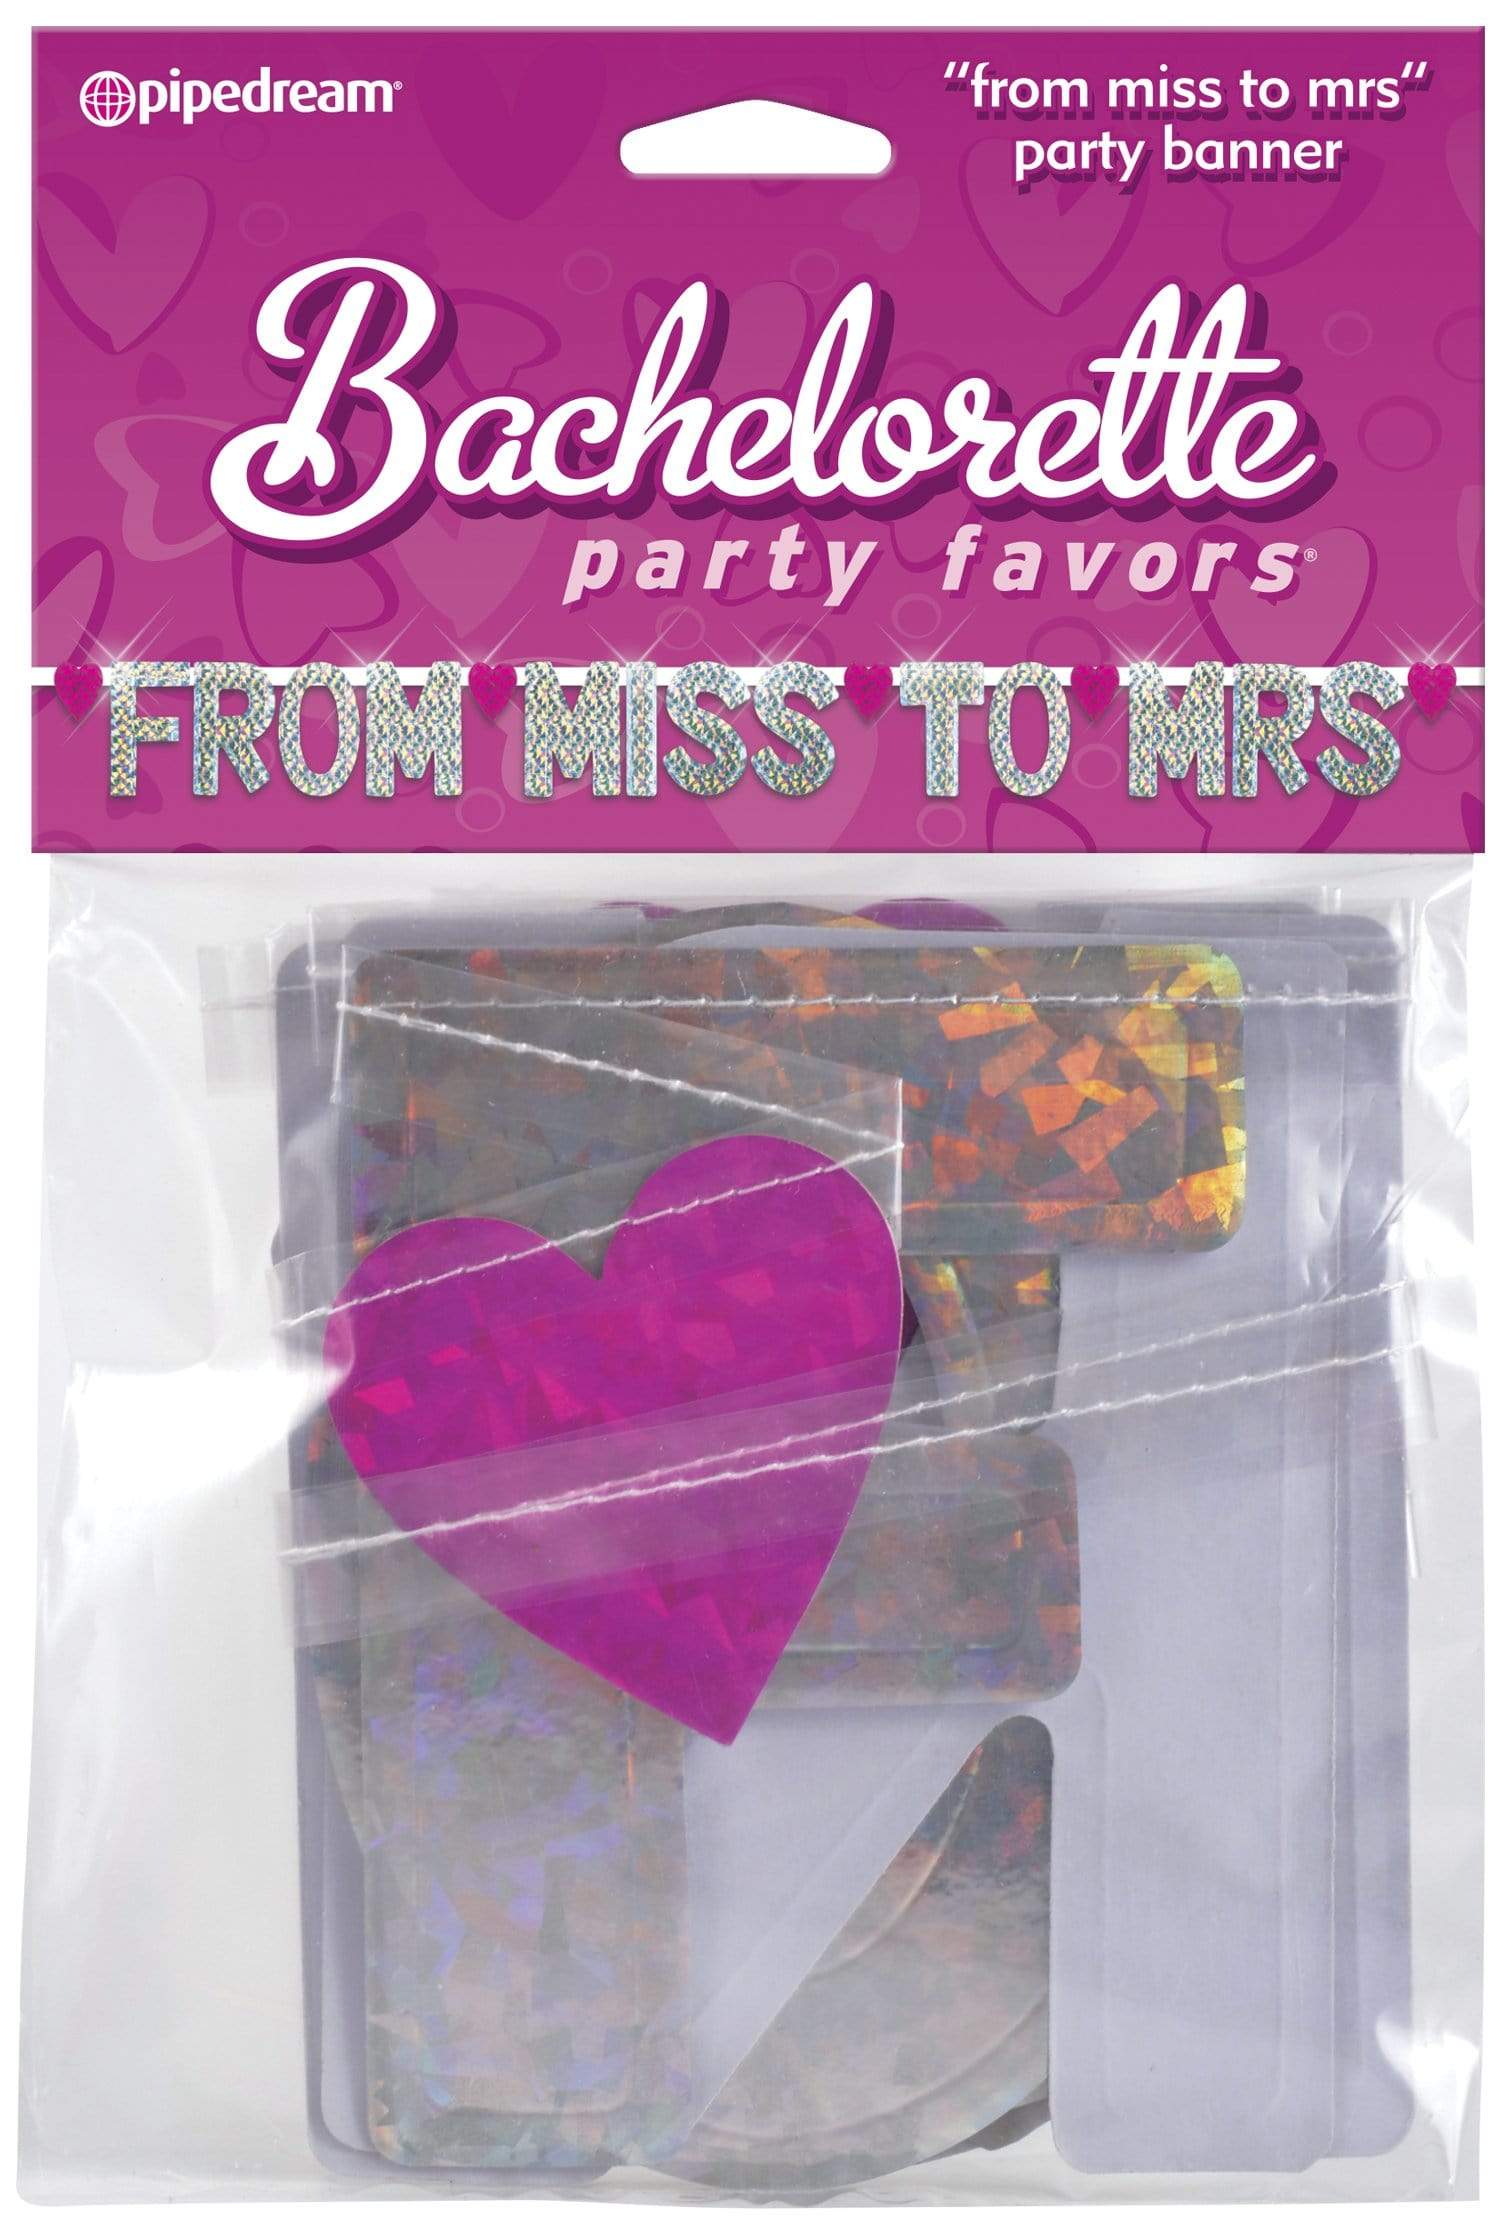 bachelorette party favors from miss to mrs banner